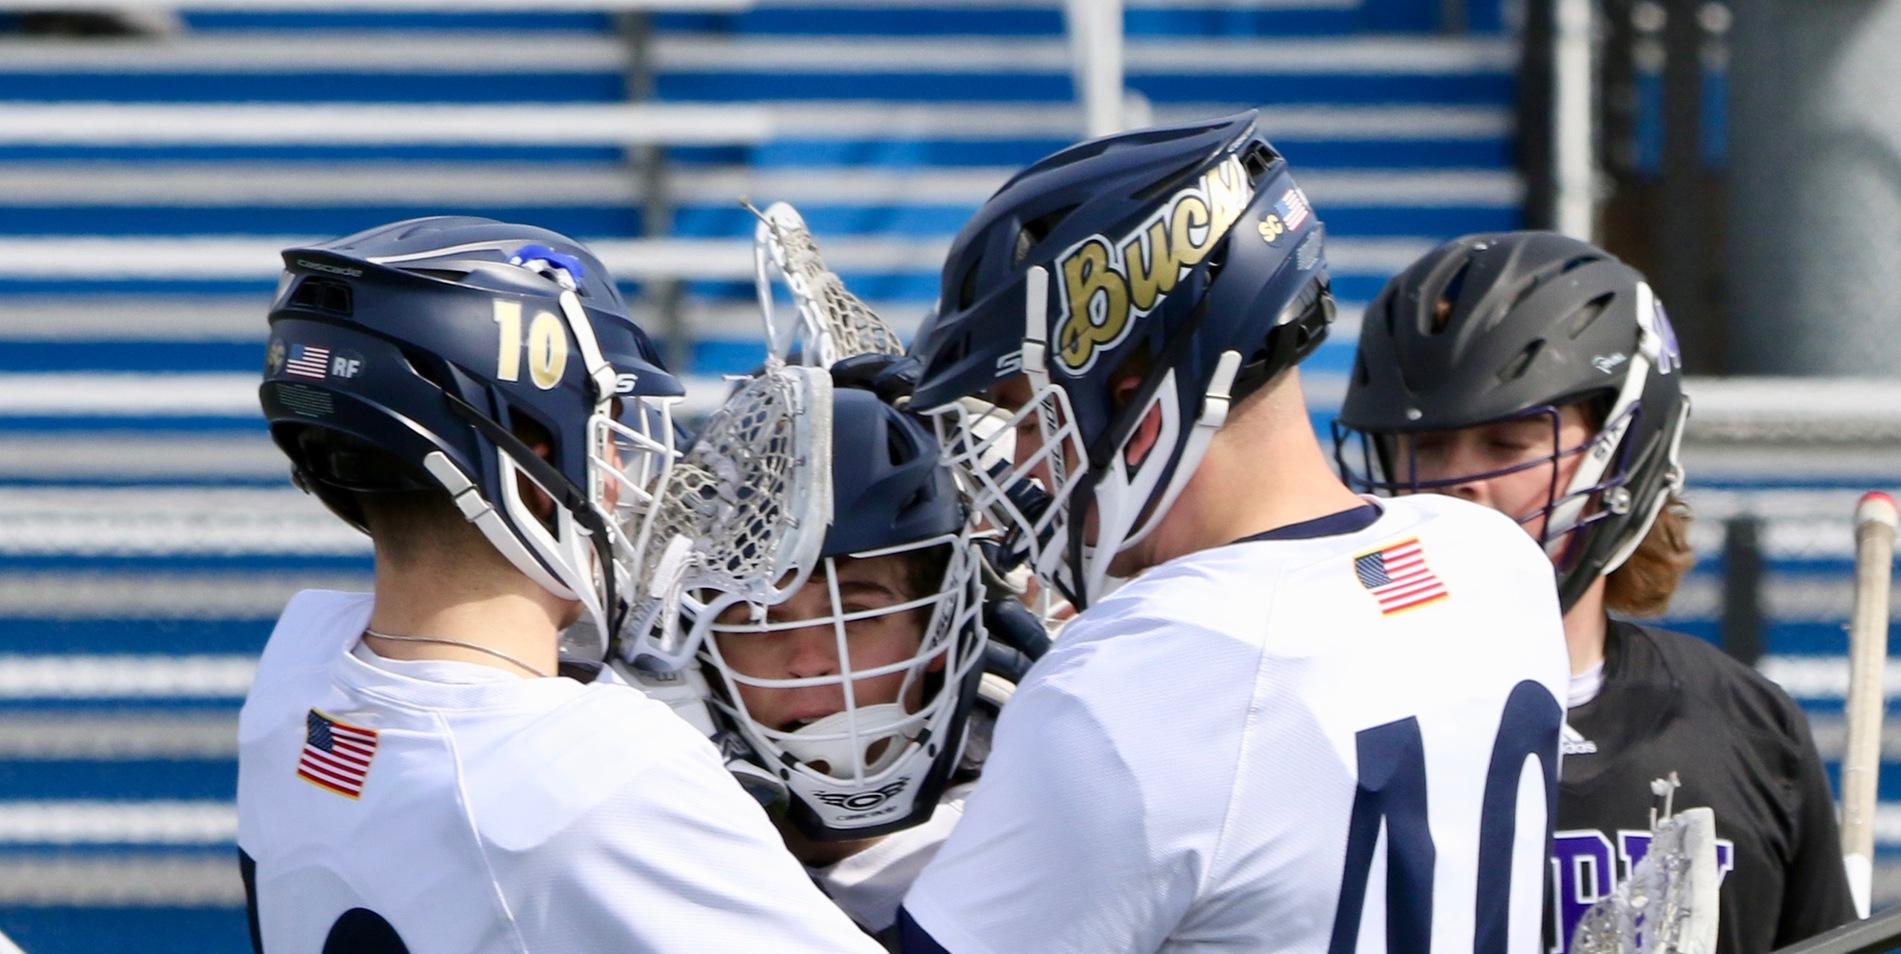 Men's Lacrosse: Bucs Comeback to Beat Panthers In Conference Play